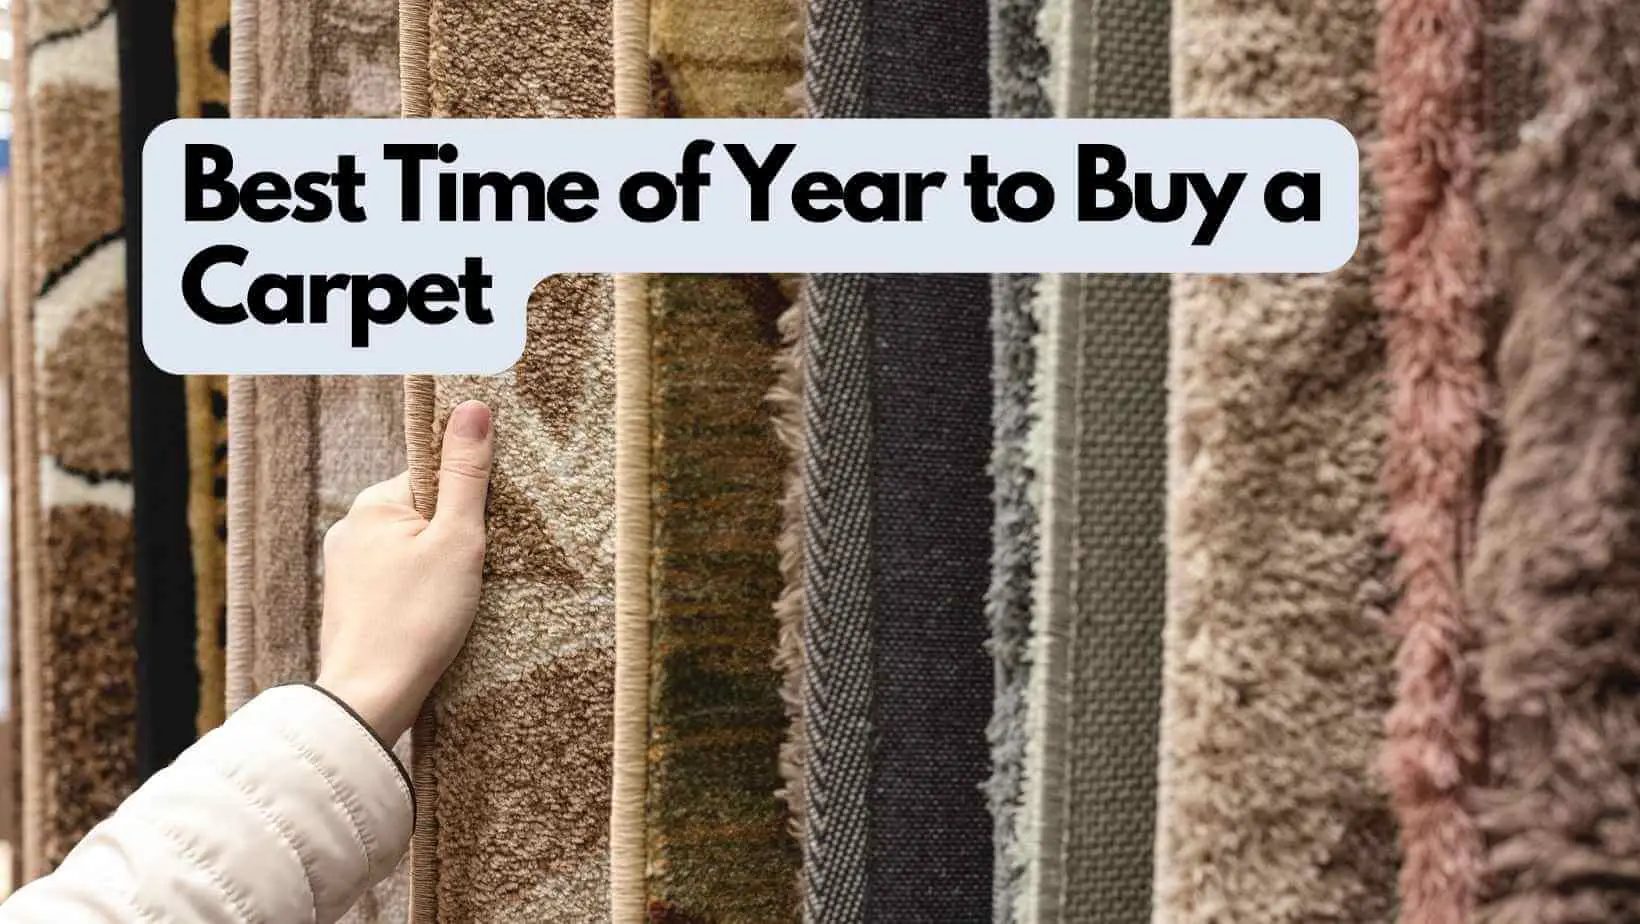 Best Time of Year to Buy Carpet